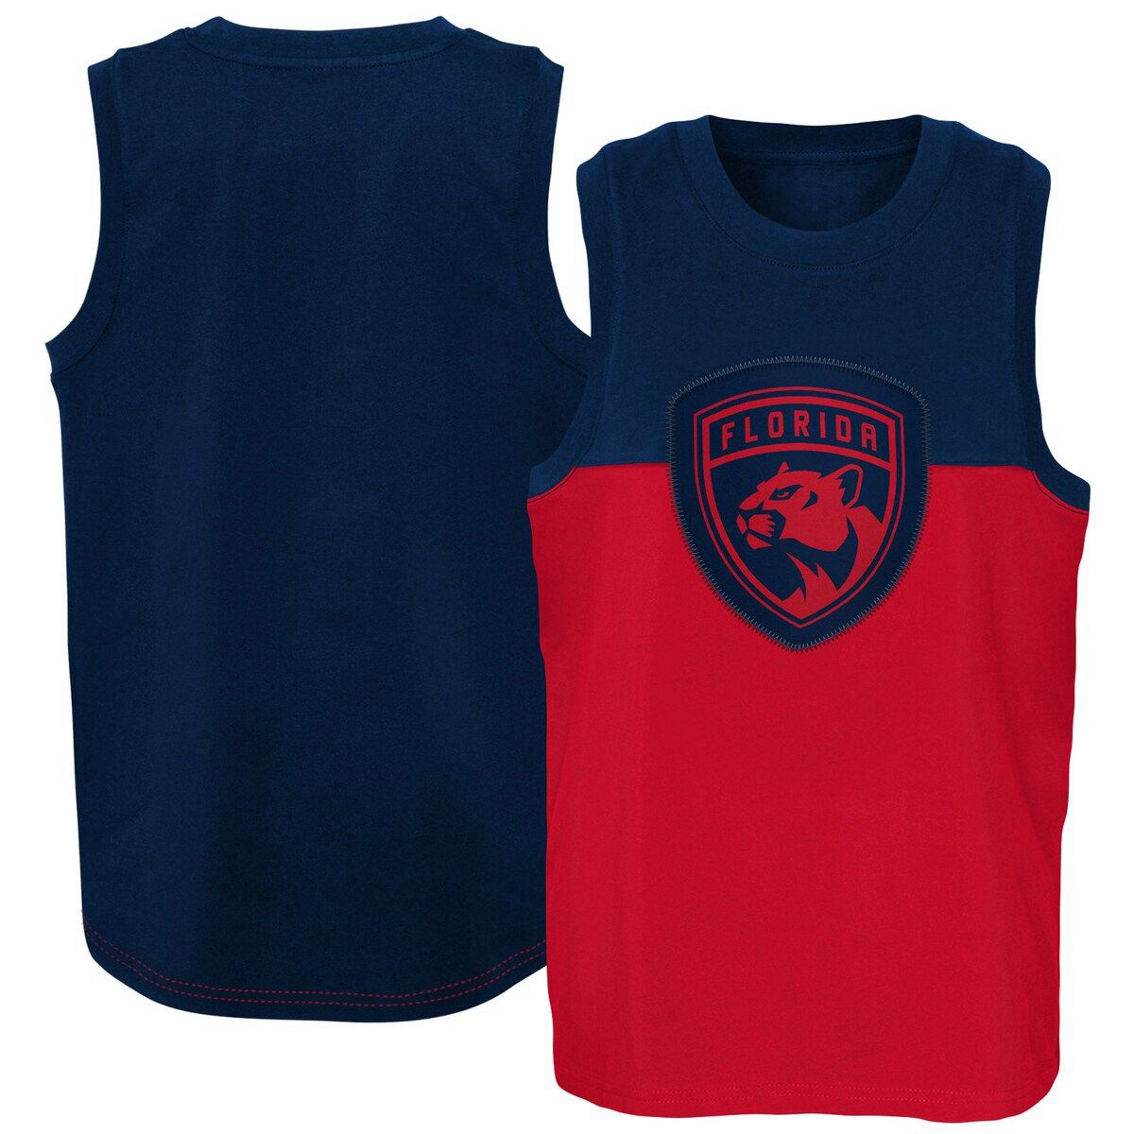 Outerstuff Youth Red/Navy Florida Panthers Revitalize Tank Top - Image 2 of 4